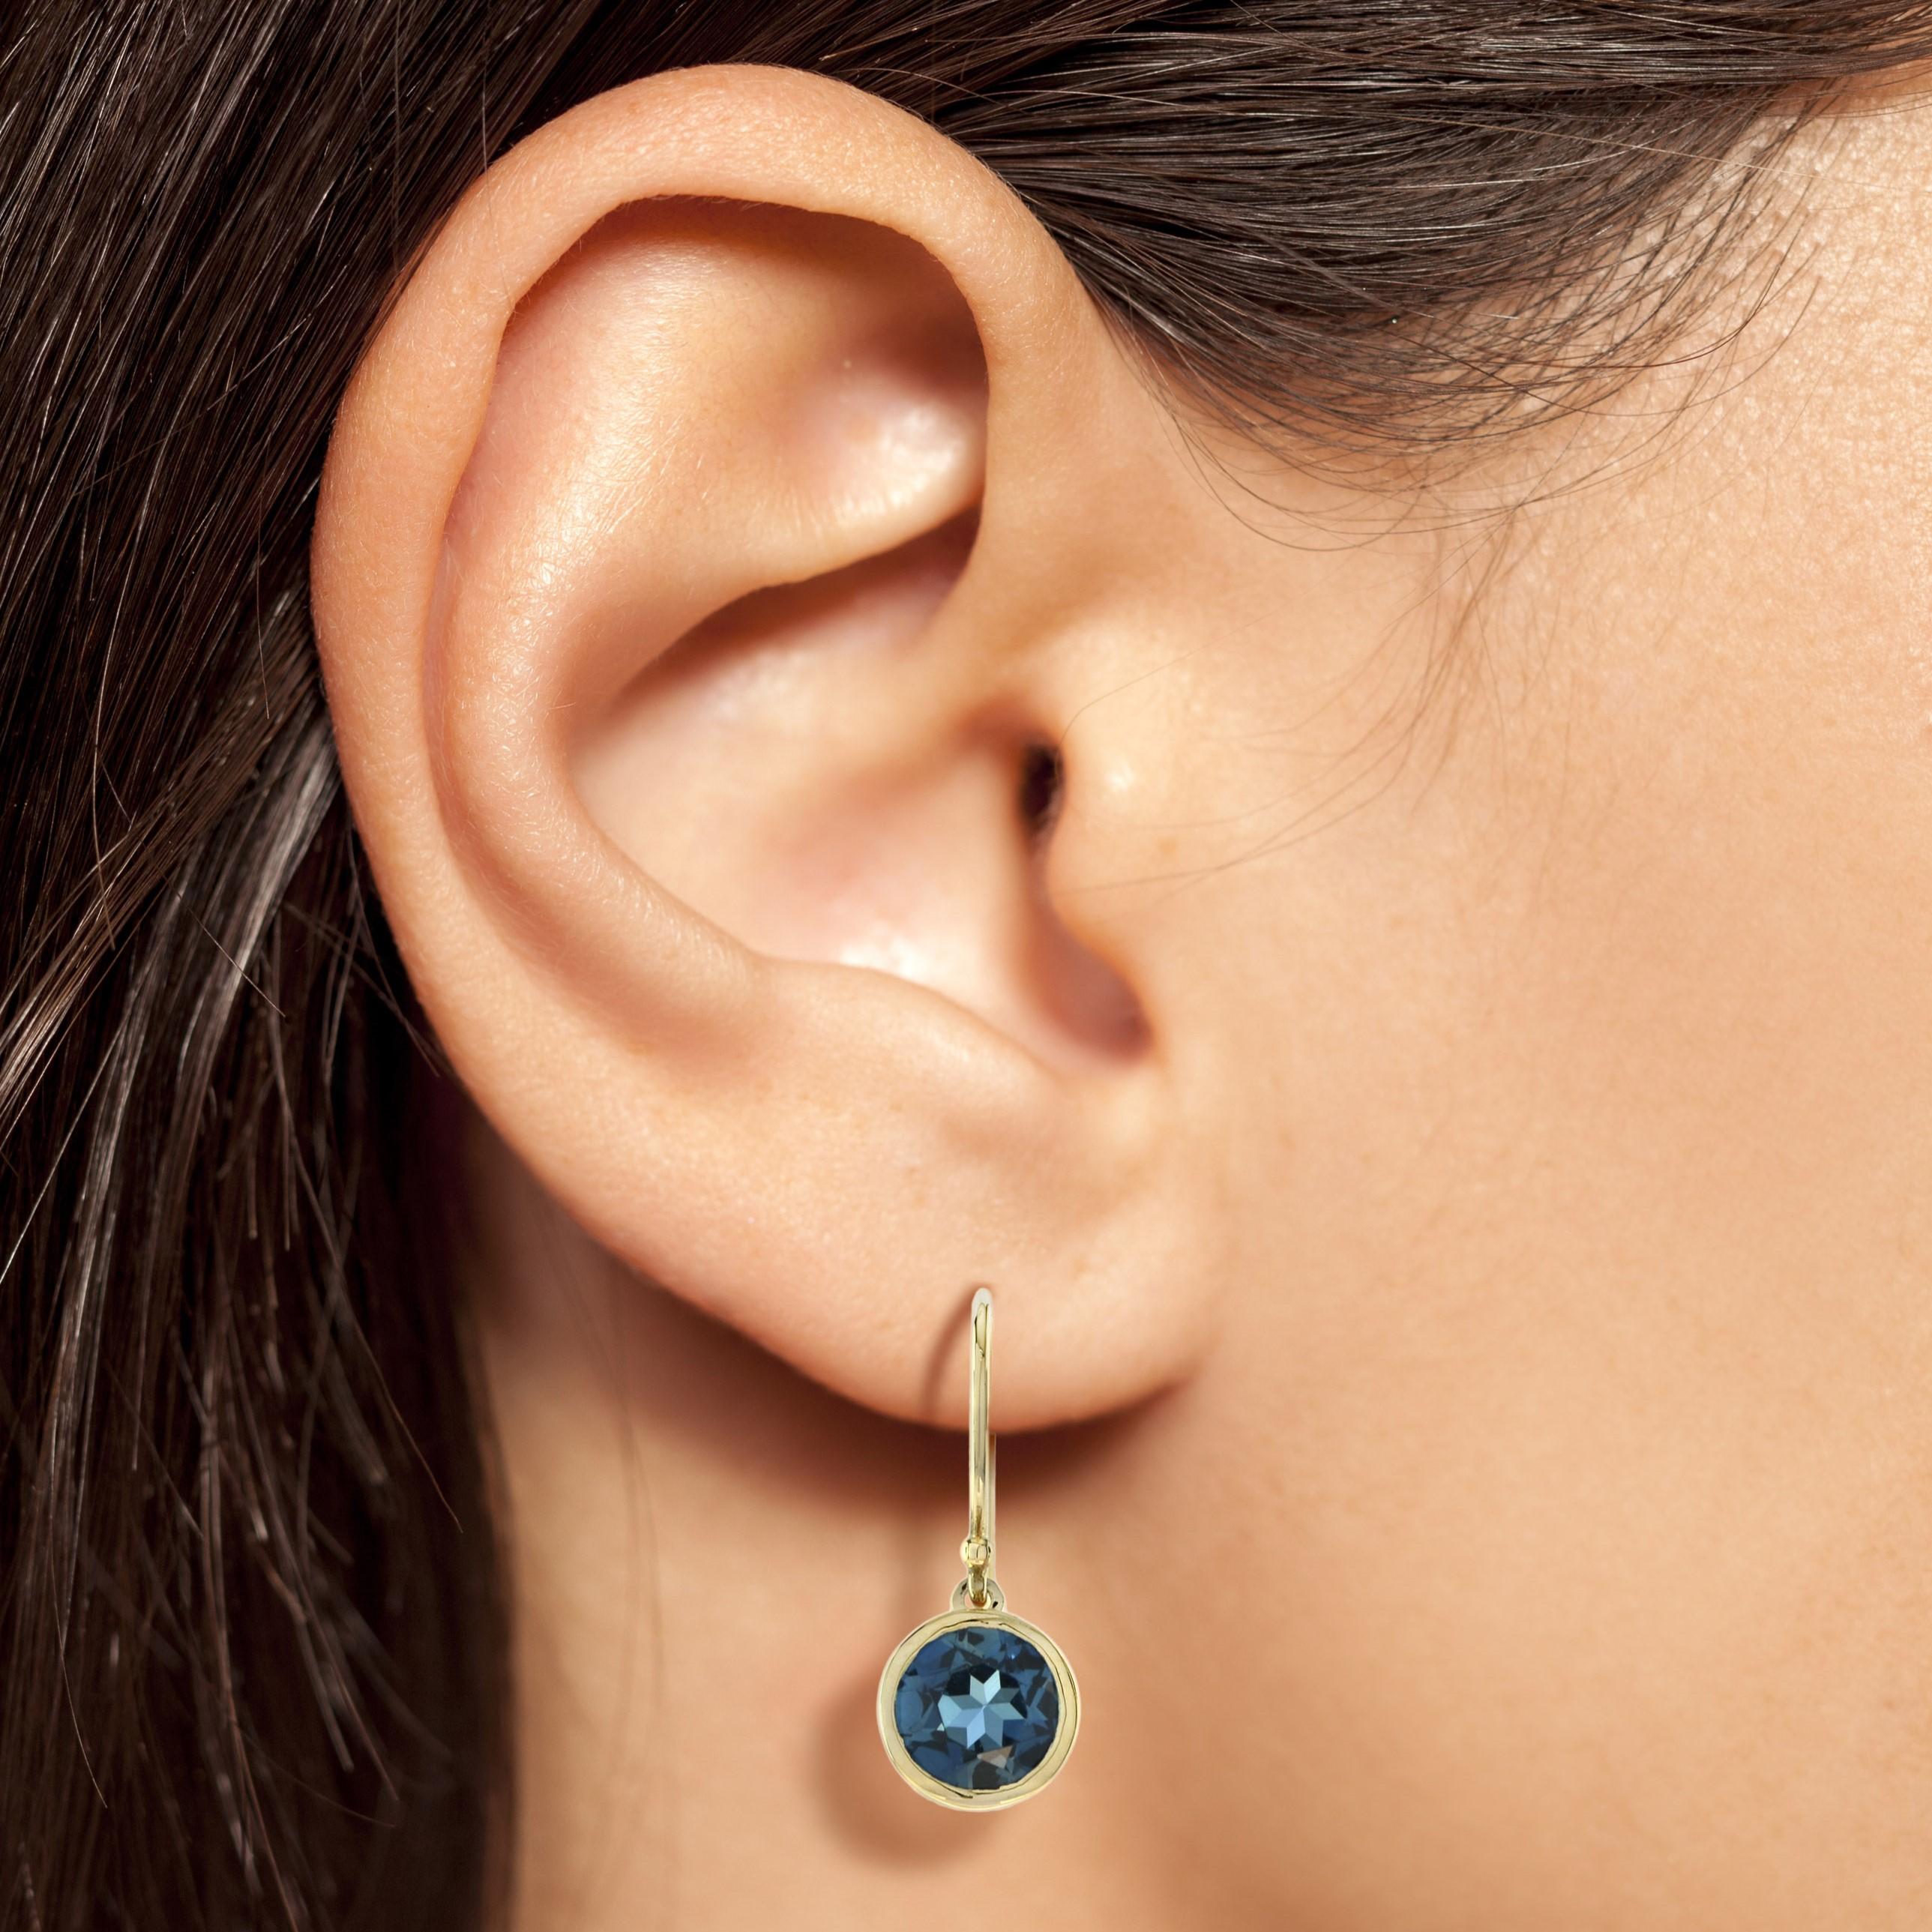 These lovely yellow gold earrings are set with a vibrant round cut London blue topaz, 7mm in diameter they are set into a yellow gold rim setting which hangs from a yellow gold hook fitting. A perfect gift for your beloved one.

Information
Metal: